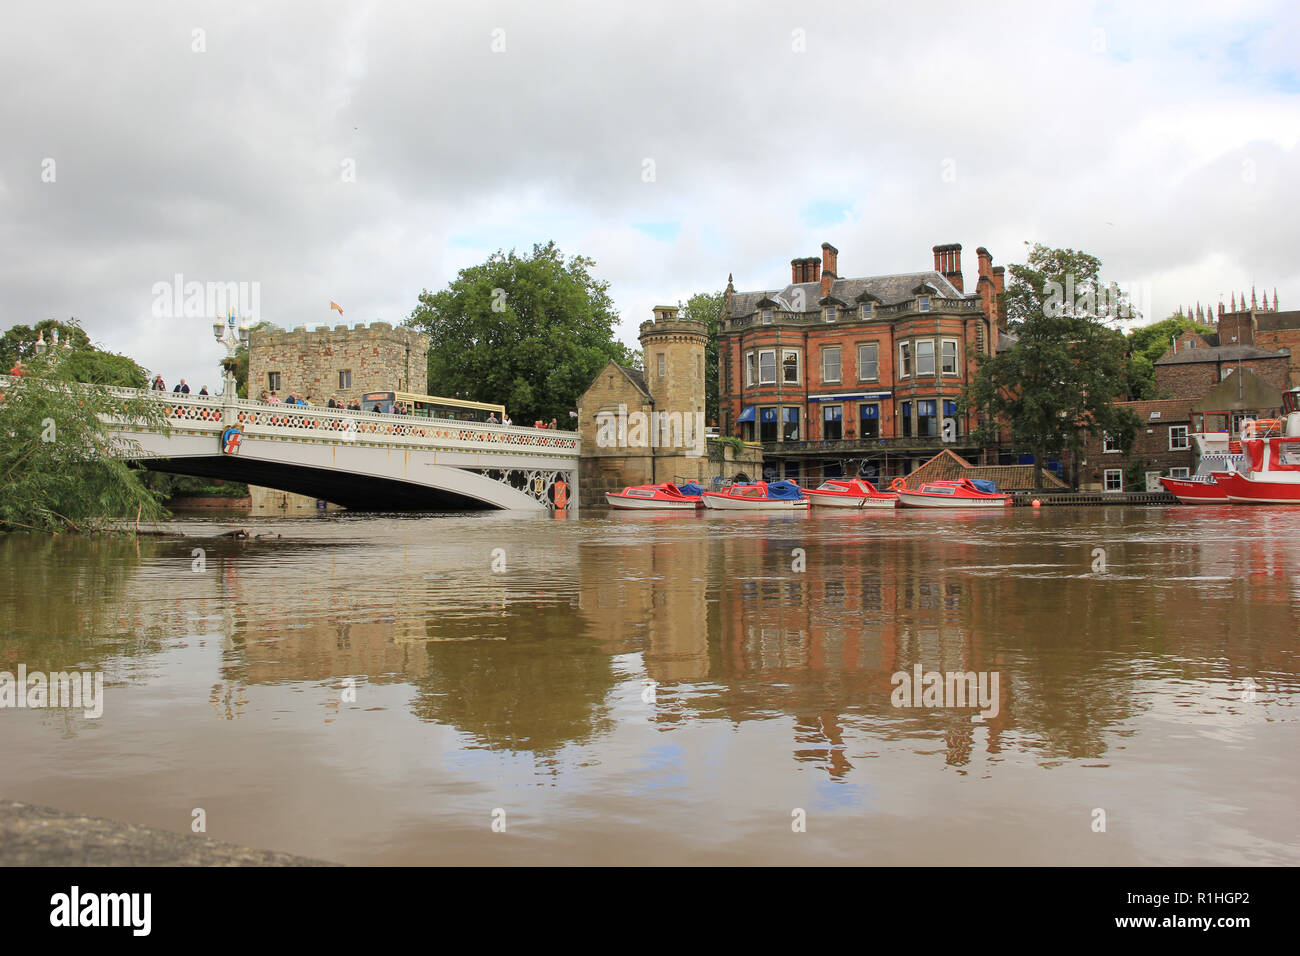 A heavily flooded River Ouse as seen from the side of the Aviva building in York. Stock Photo